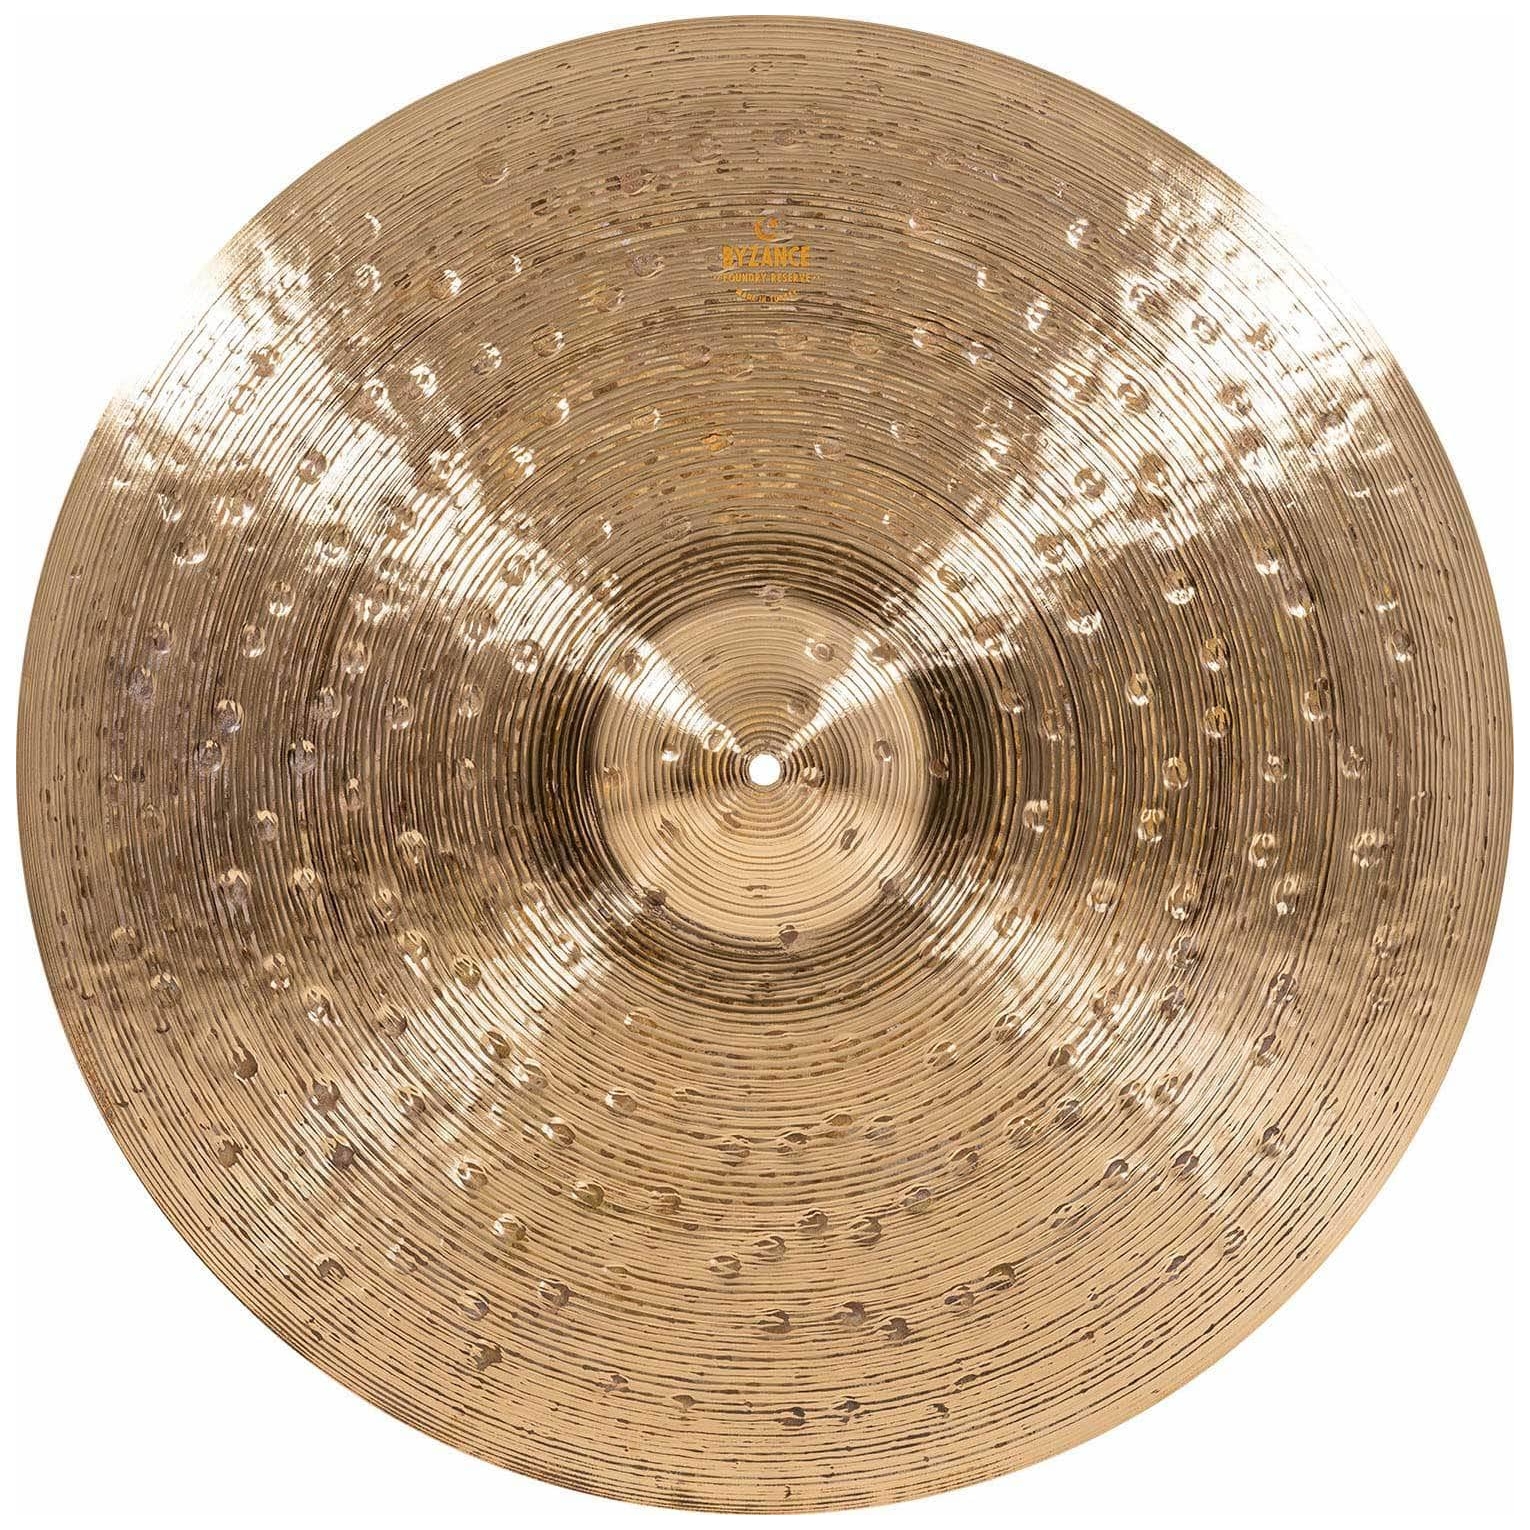 Meinl Cymbals B24FRR - 24" Byzance Foundry Reserve Ride 